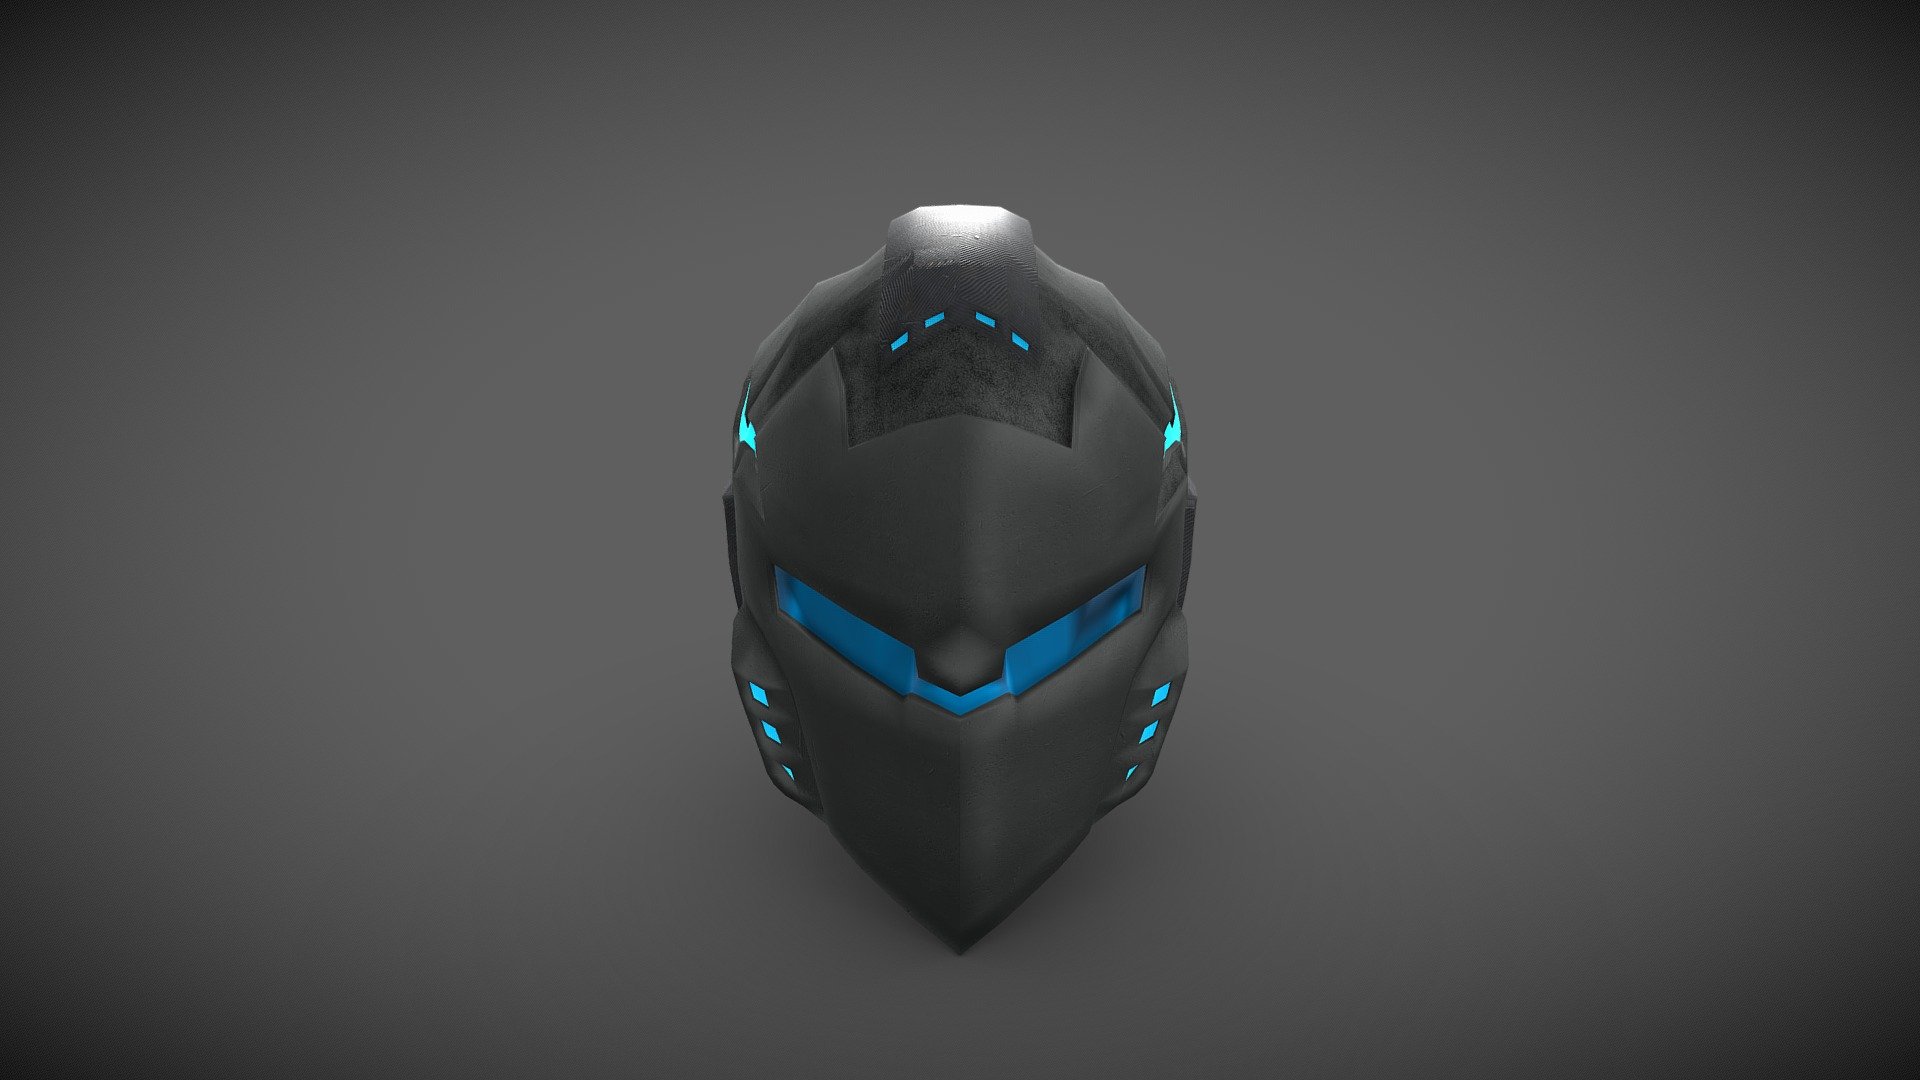 A helmet of my own design / creation, will later be used in a game i'm developing in the Unity Engine. &ldquo;StormForth: Tempest Strike